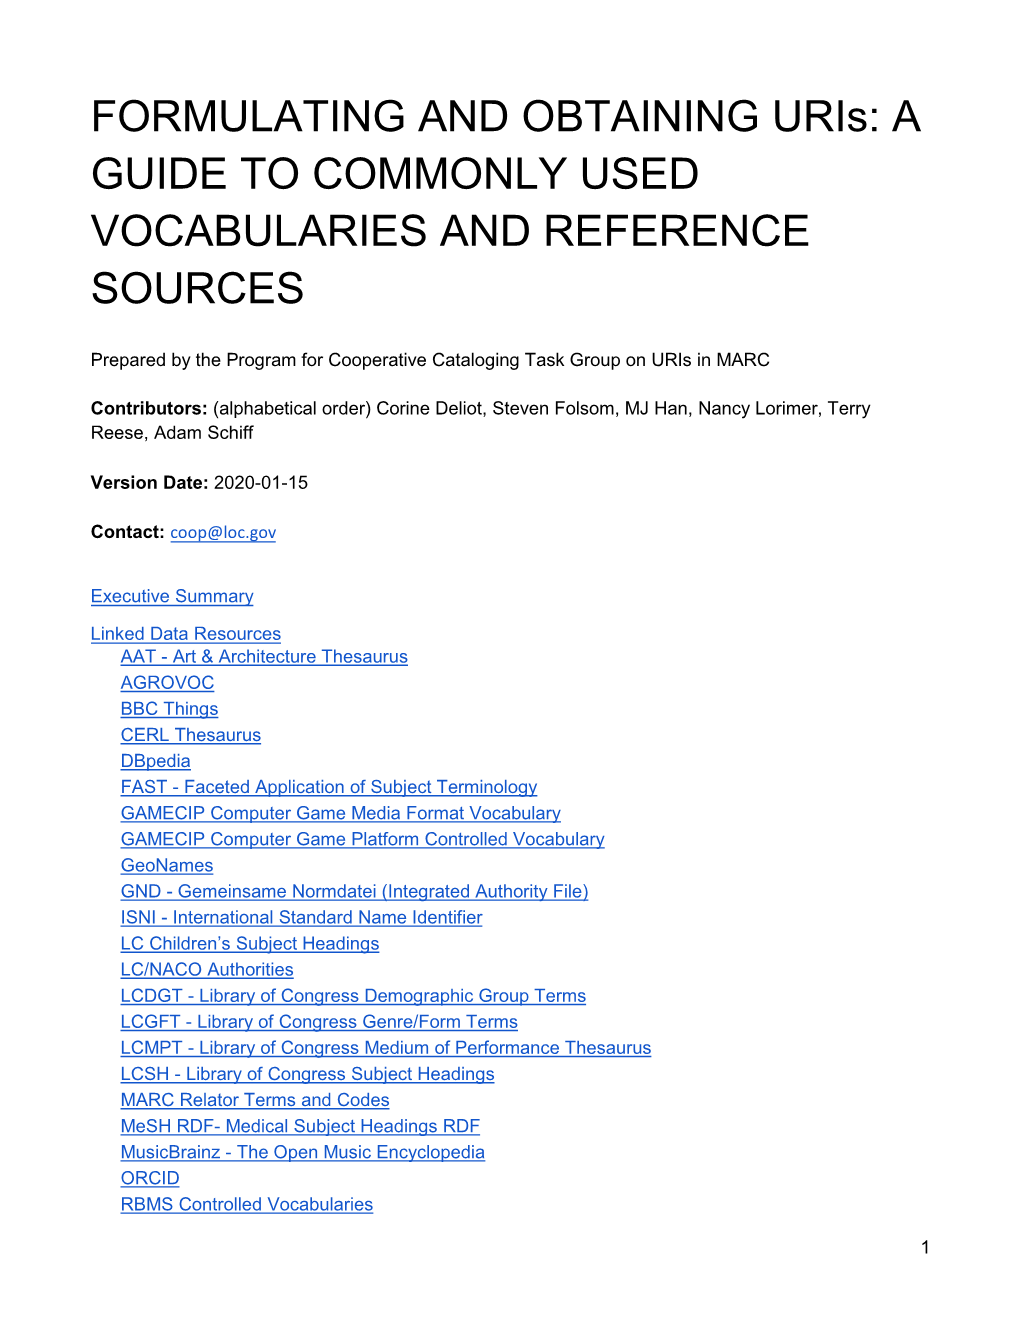 FORMULATING and OBTAINING Uris: a GUIDE to COMMONLY USED VOCABULARIES and REFERENCE SOURCES